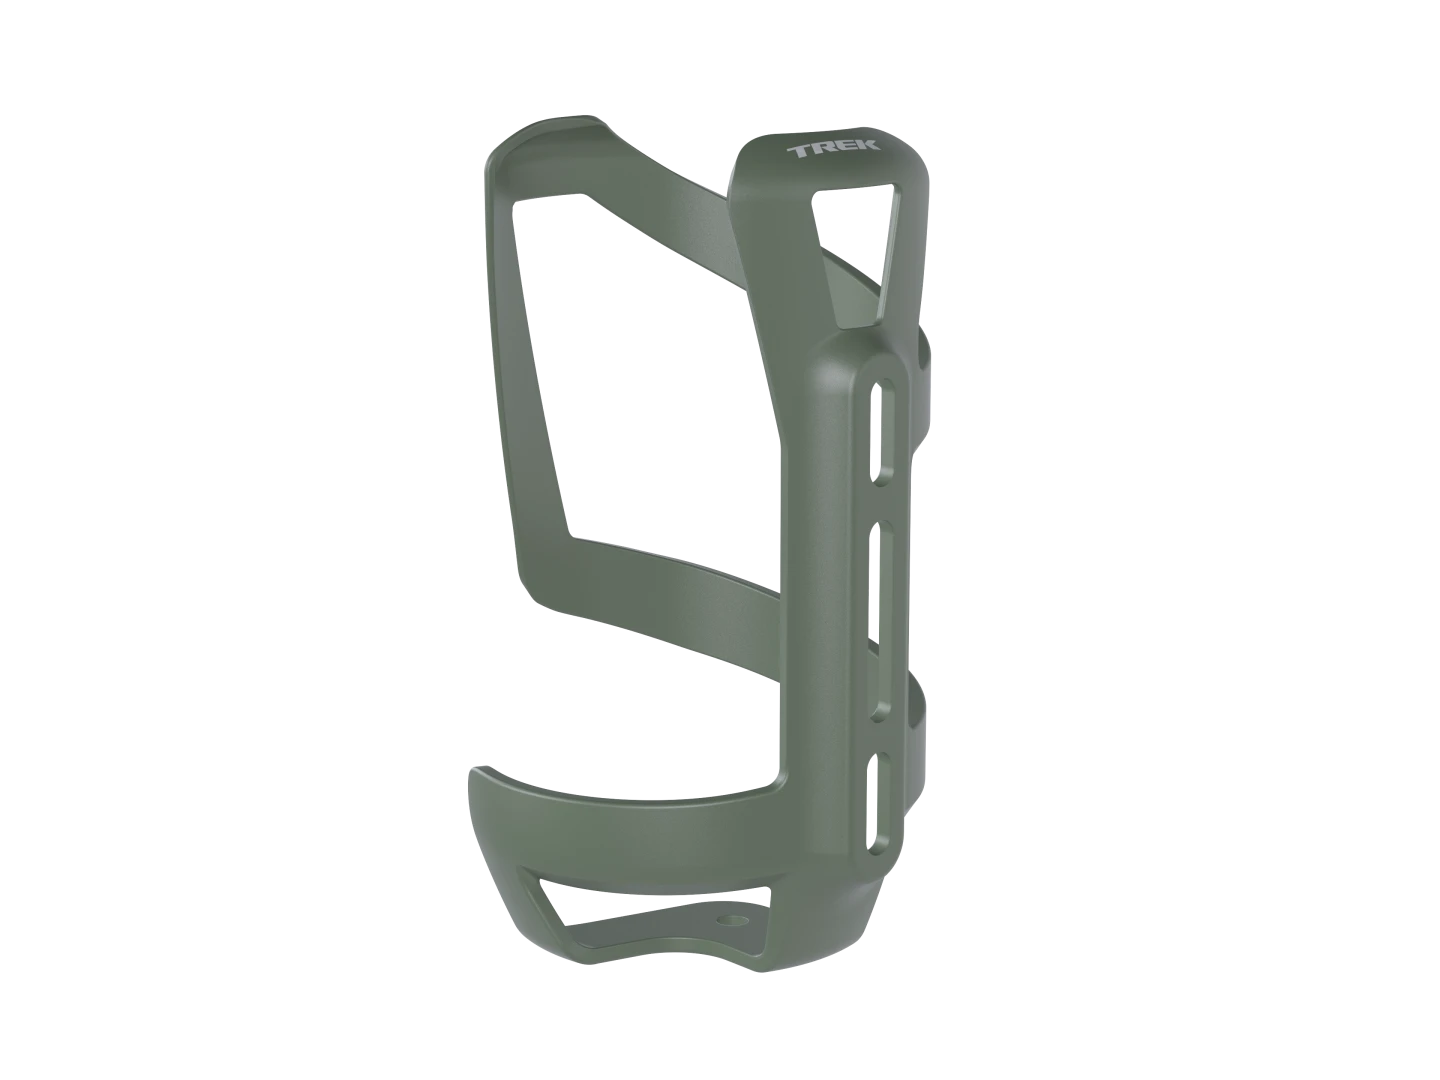 TREK RIGHT SIDE LOAD RECYCLED WATER BOTTLE CAGE - MATTE OLIVE GREY